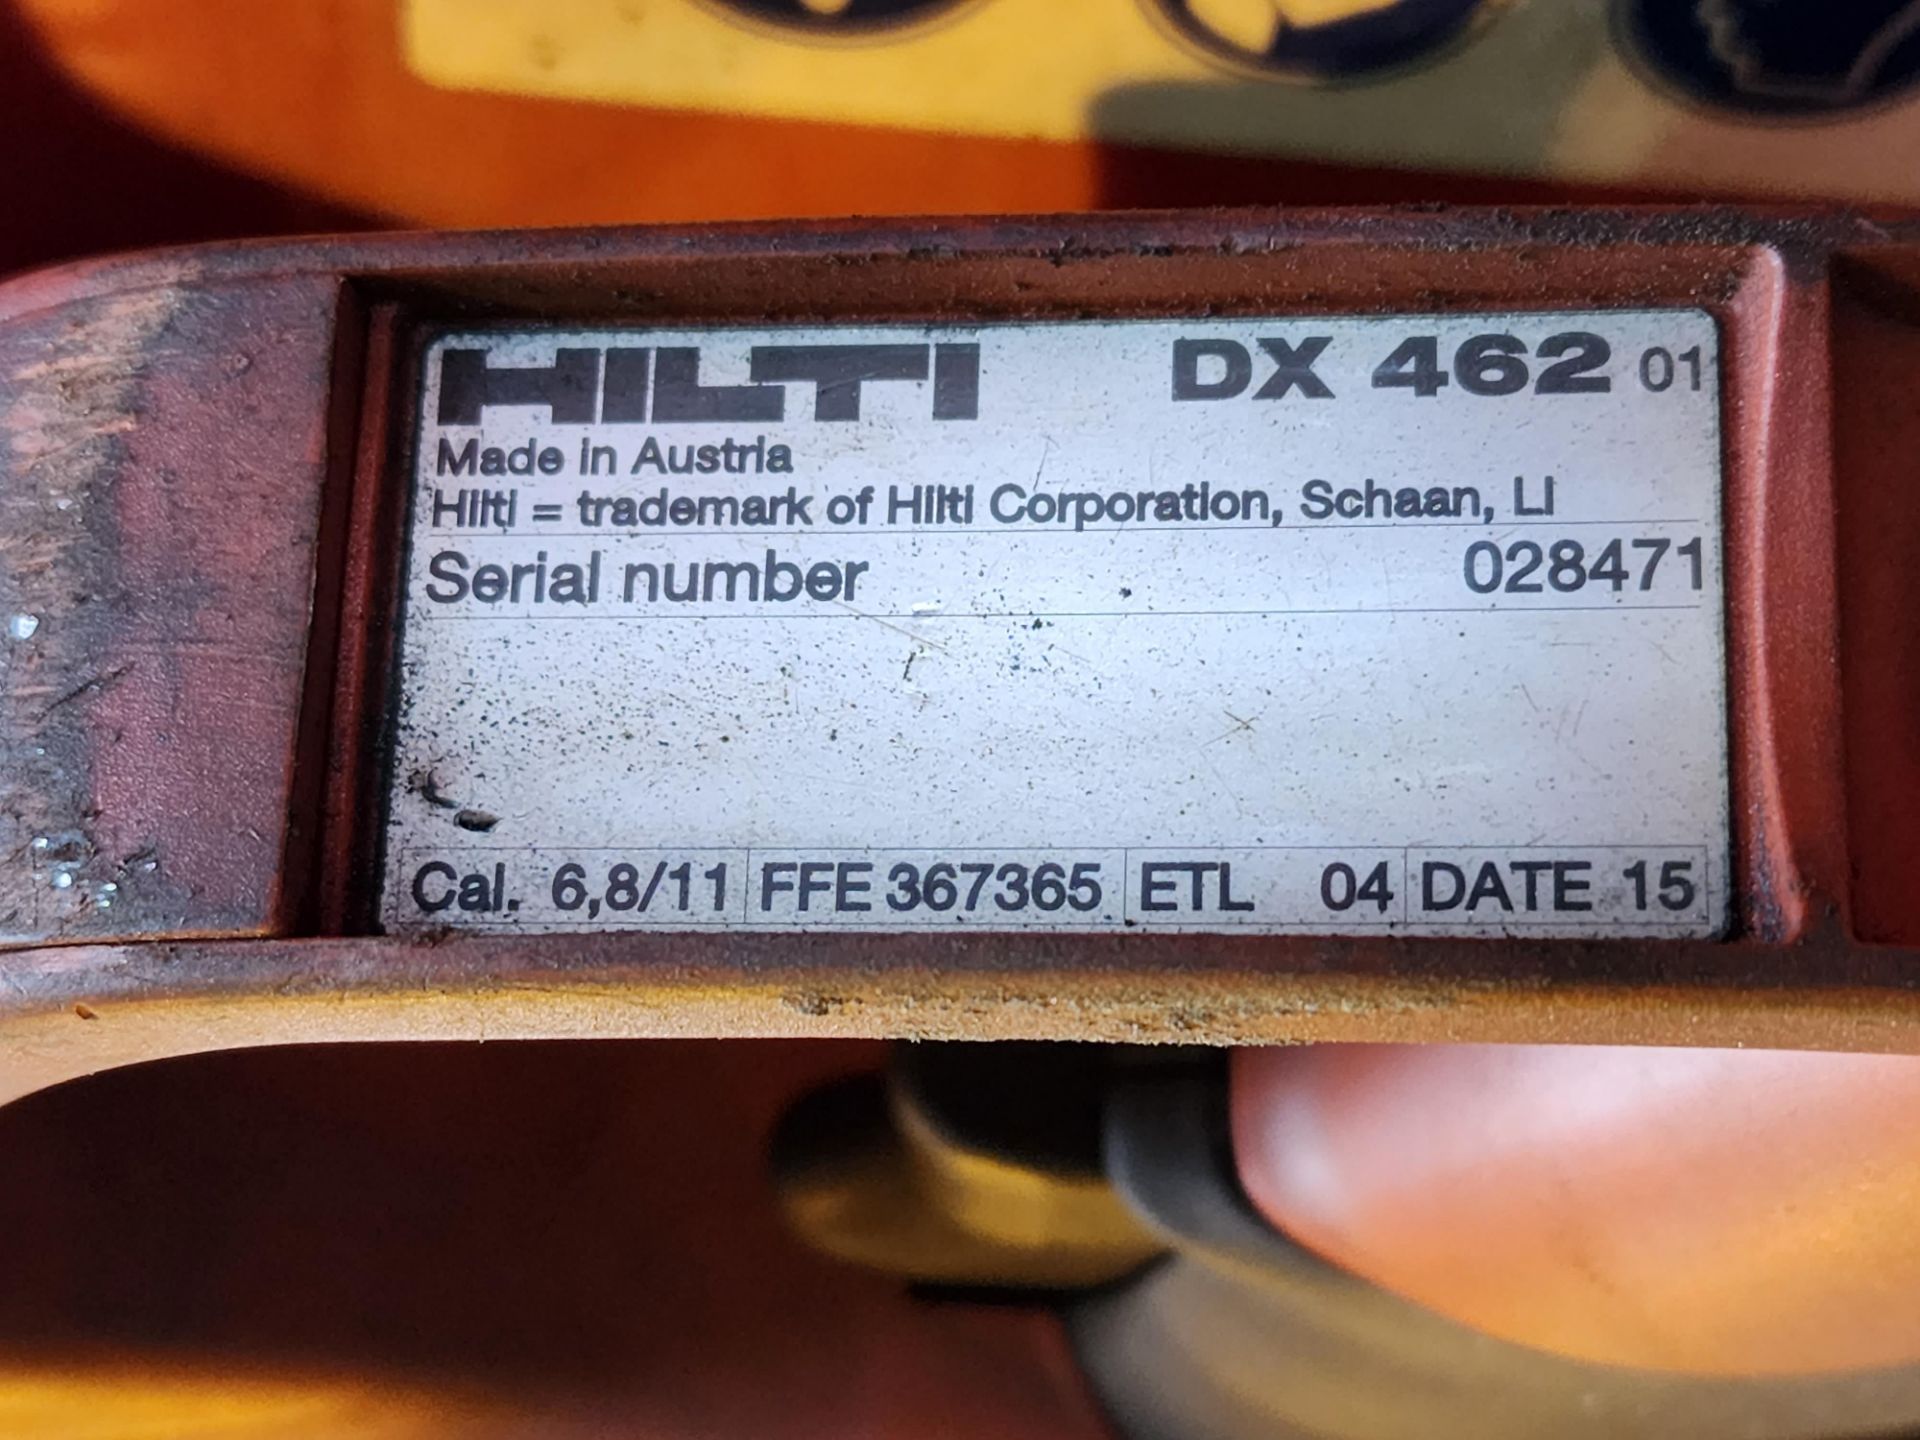 Hilti DX 462 Powder Actuated Marking Tool - Image 4 of 4